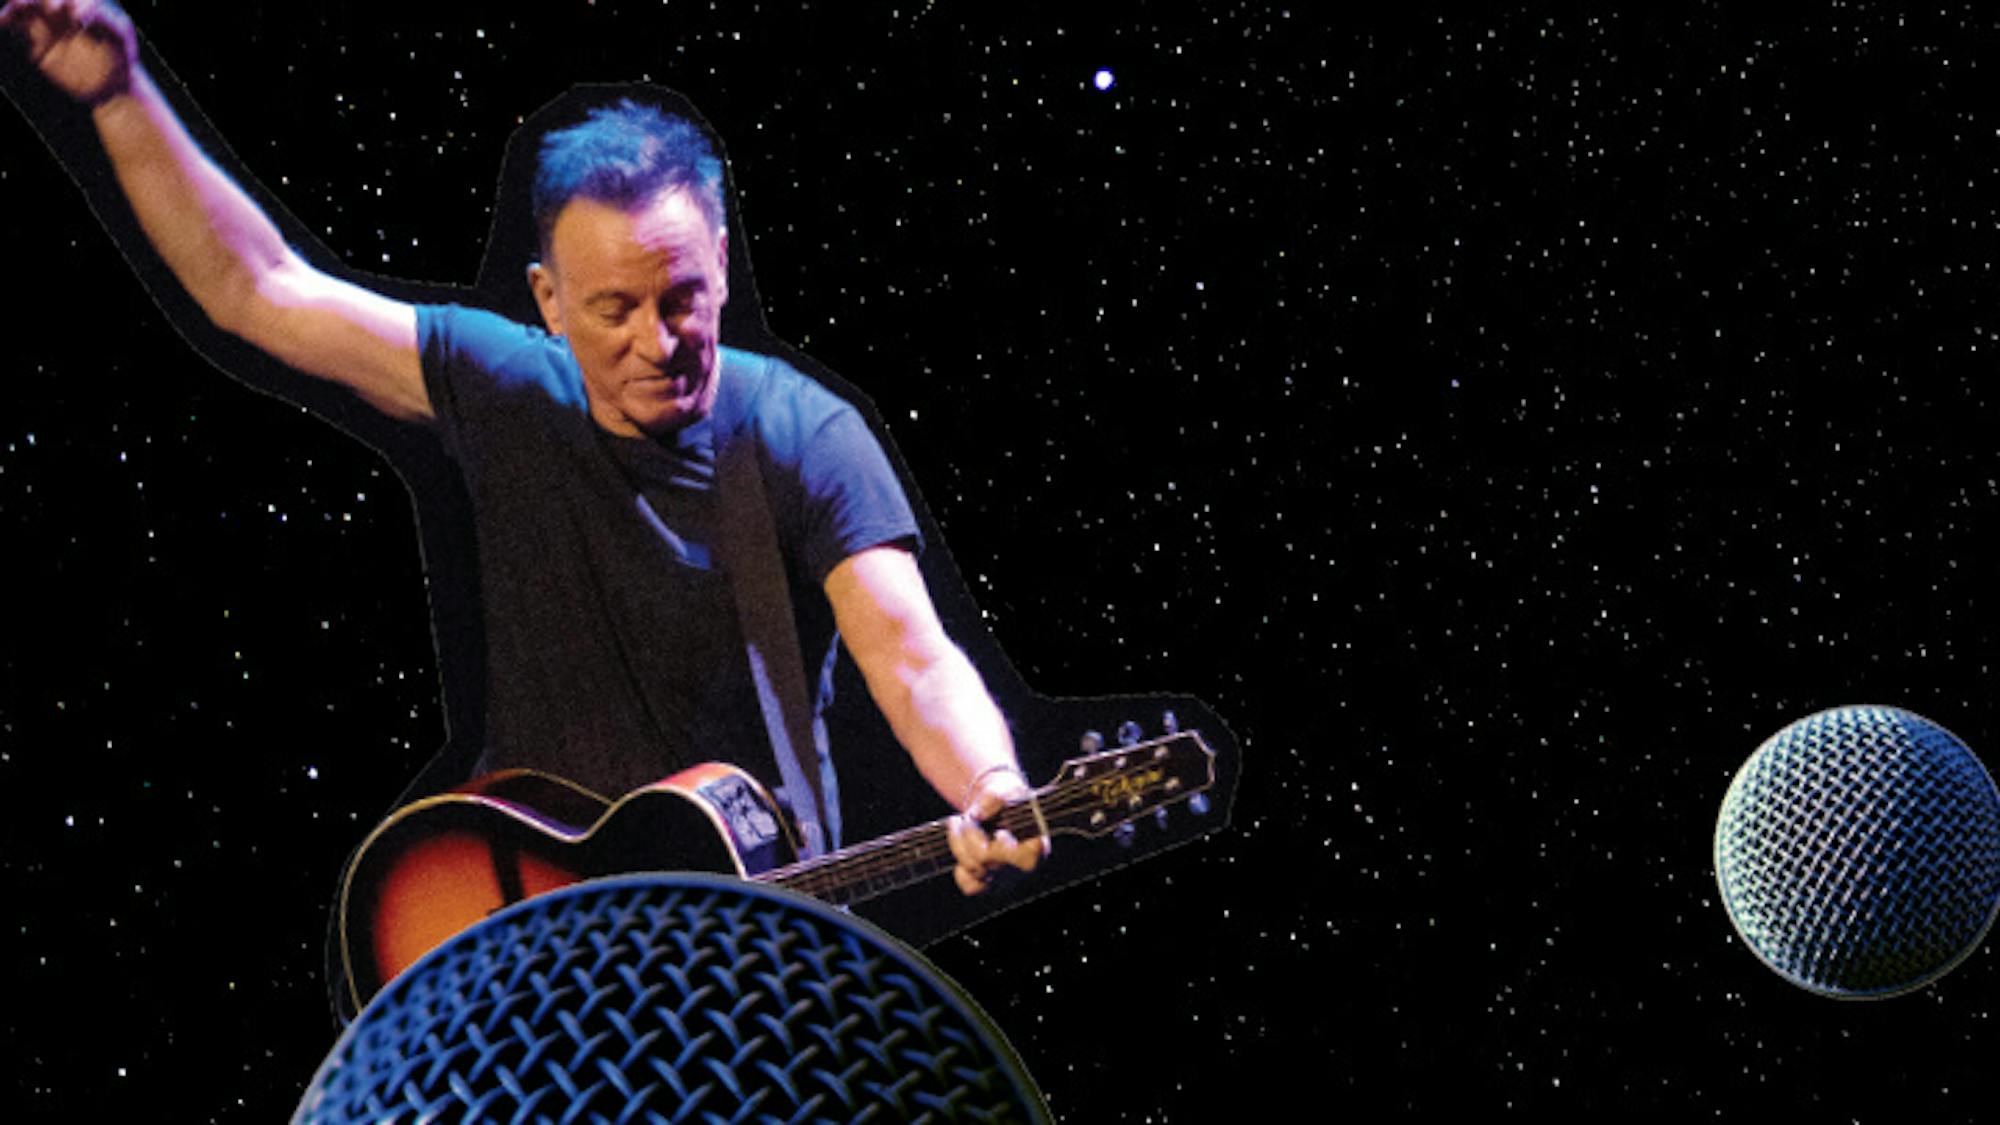 Bruce Springsteen floats amidst microphone tops strumming his guitar in a dark t-shirt.